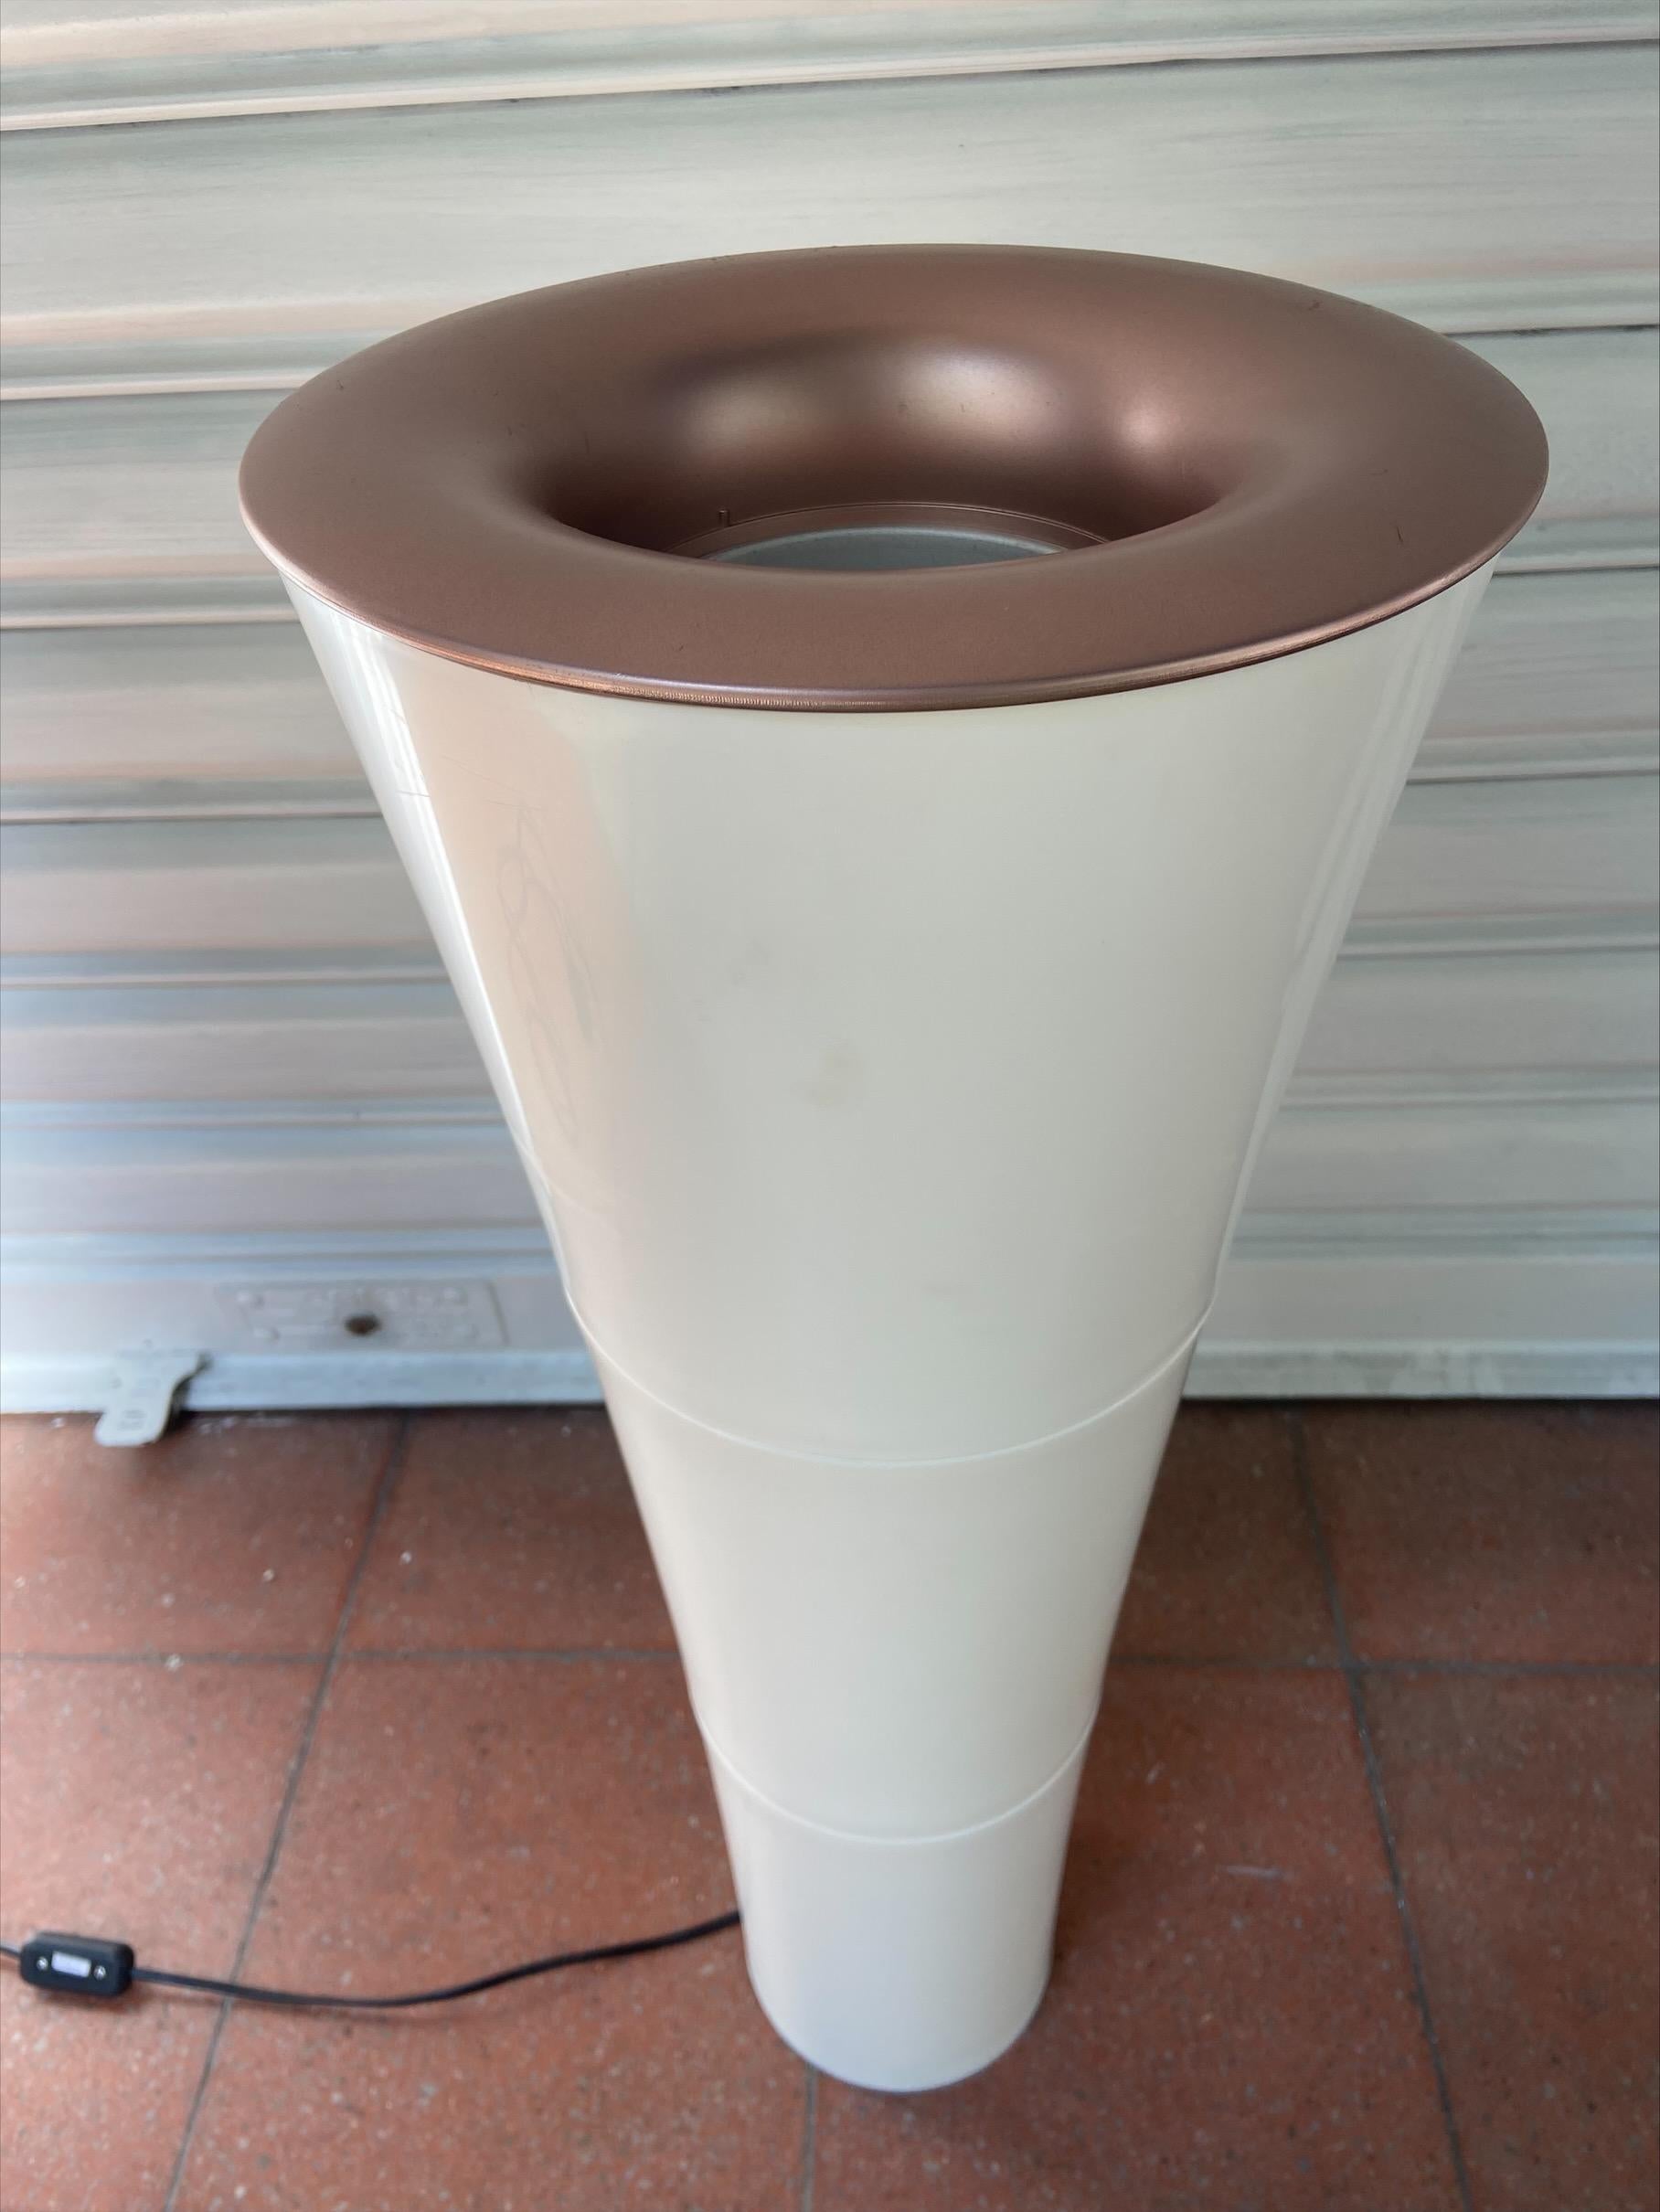 Torch floor lamp - Kaoyi Flacha - Circa 1980
Made in Japan
In white and rose gold PVC in perfect condition.
Electricity in perfect working order.
Height: 78cm.
Diameter at the top: 30.5 cm.
Diameter at the base: 16 cm.